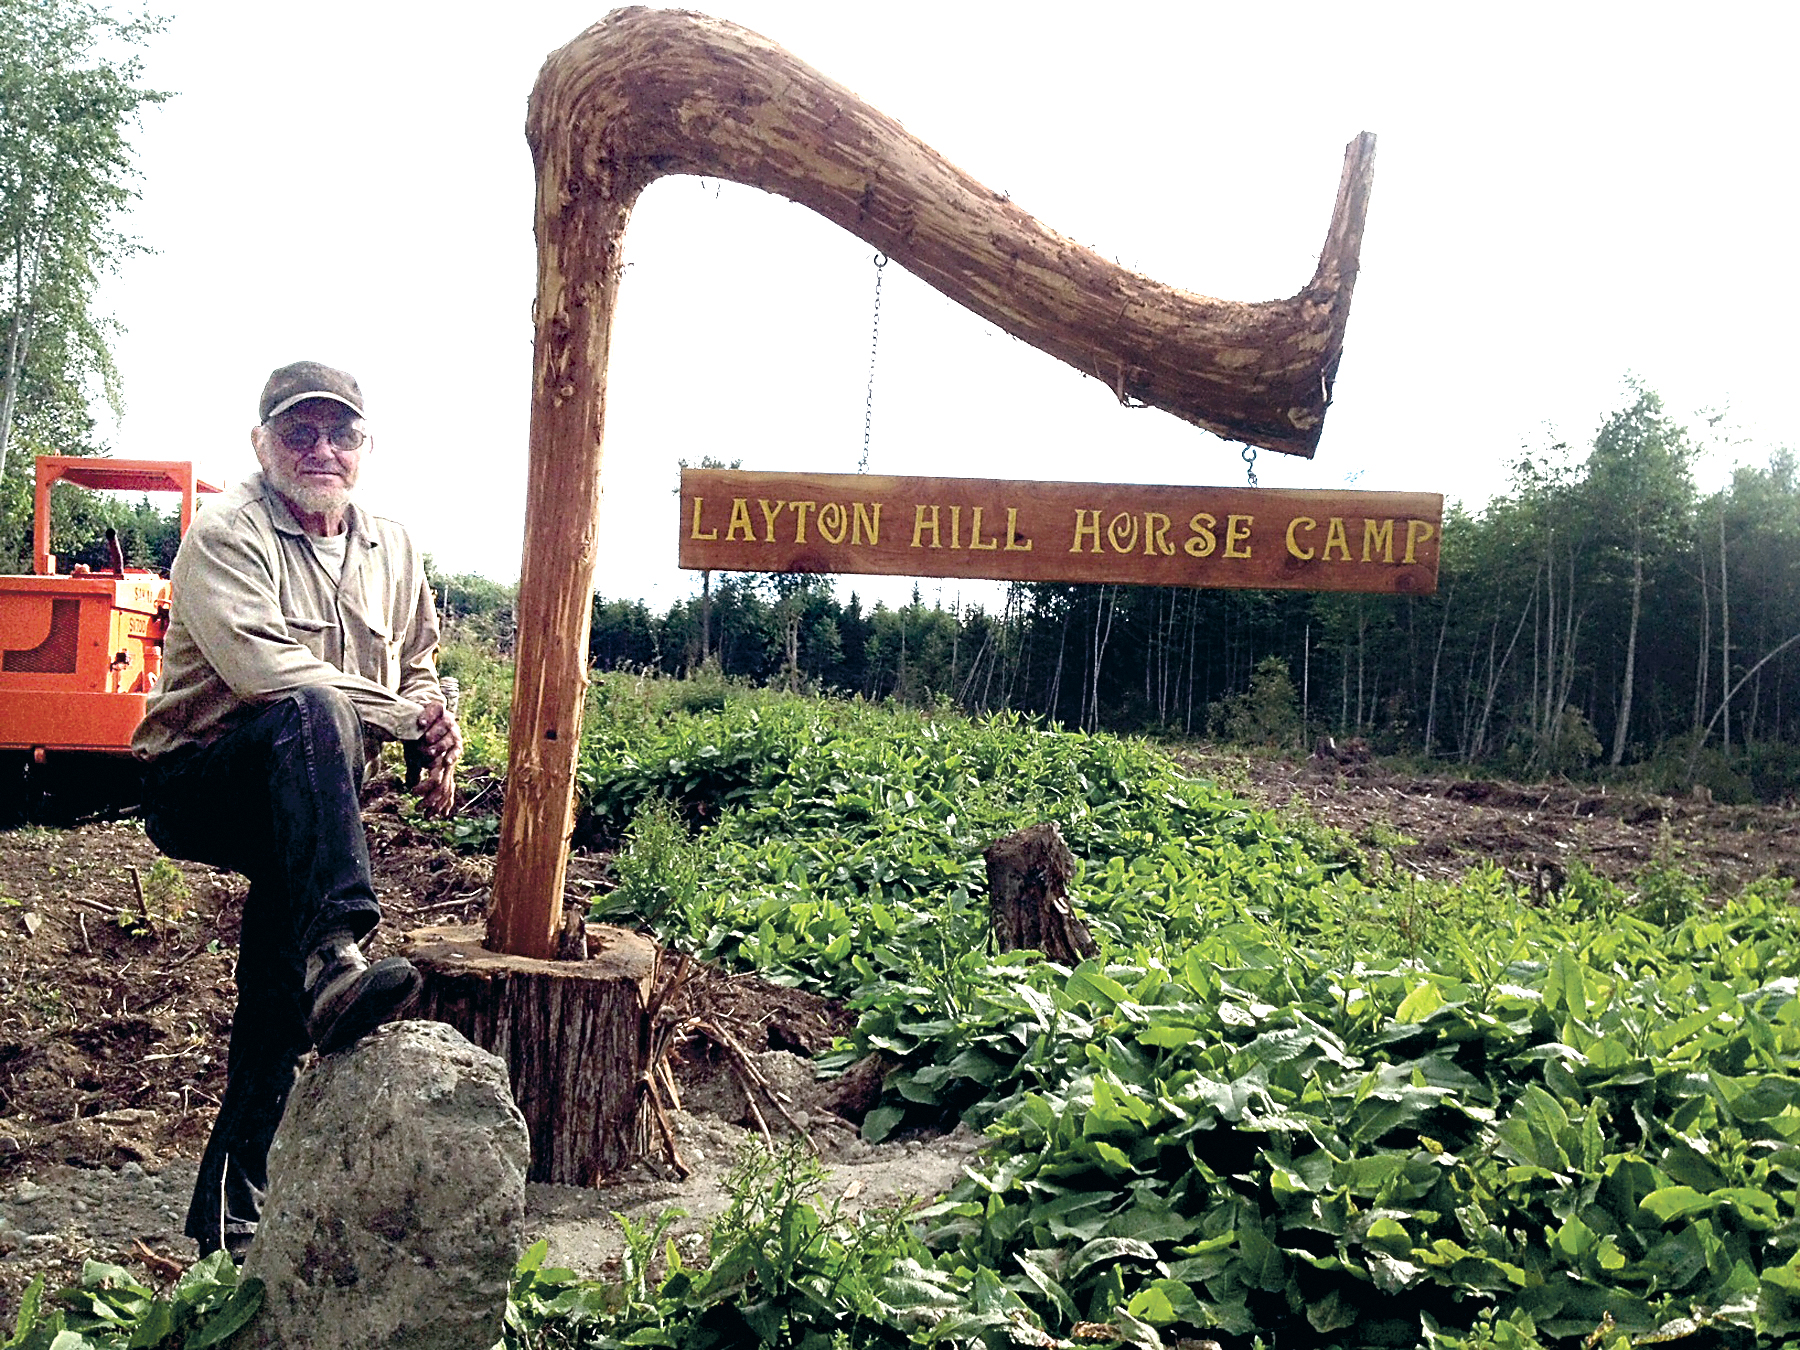 Del Sage crafted this sign signifying the entrance to his family’s new Layton Hill Horse Camp off Chicken Coop Road in Blyn. This Saturday